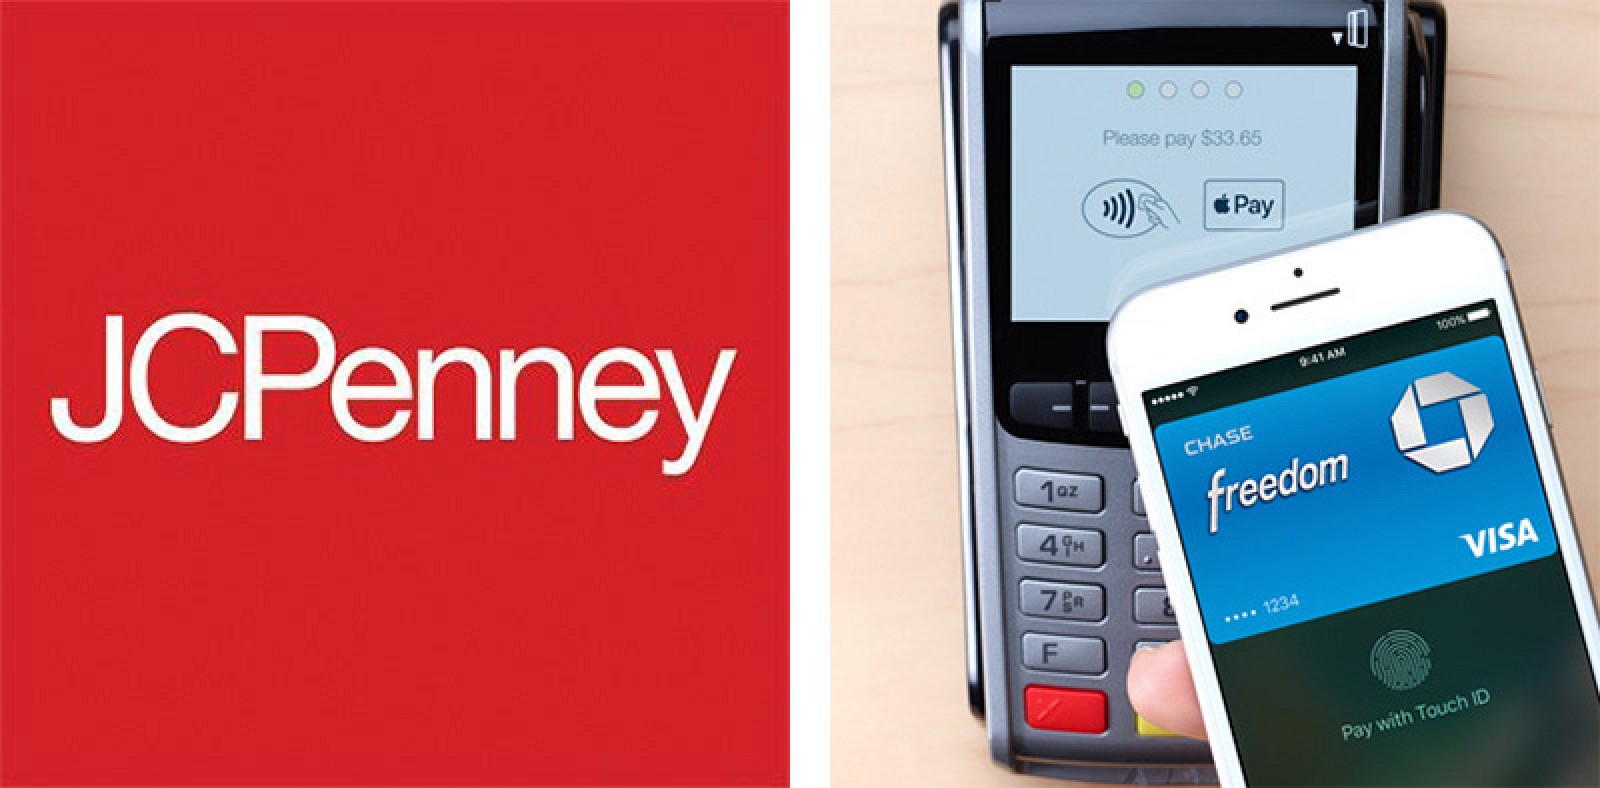 Apple pay. Jcpenney. Коробке фирмы jcpenney,. Apple pay прикол. A pay support